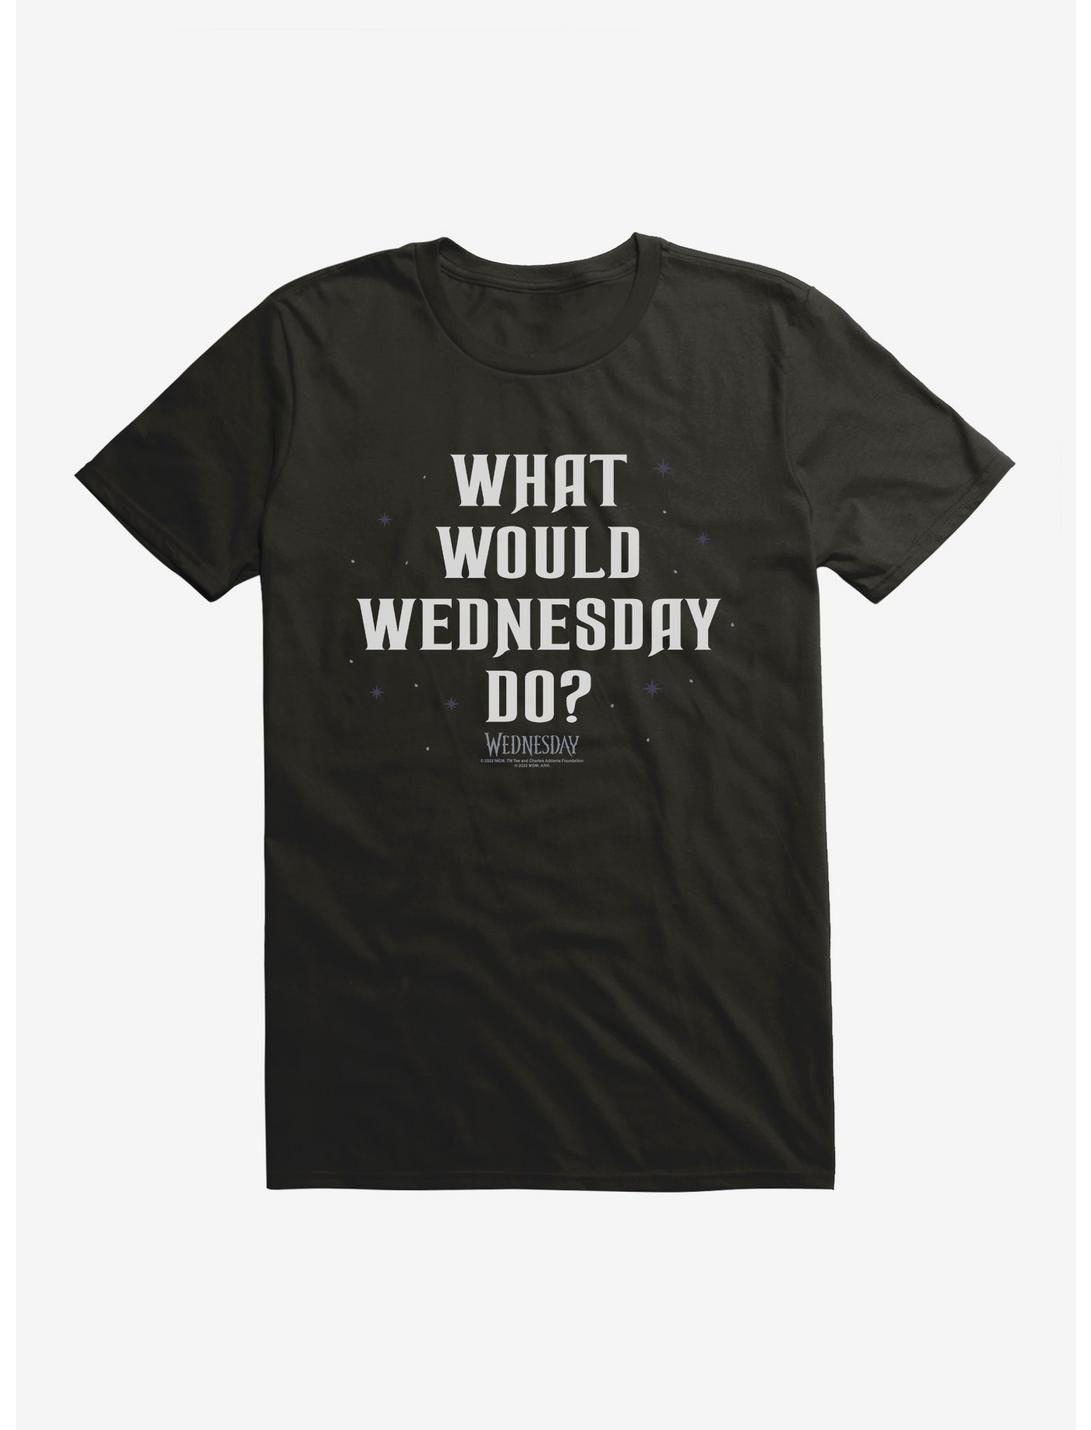 Wednesday What Would Wednesday Do? T-Shirt, BLACK, hi-res